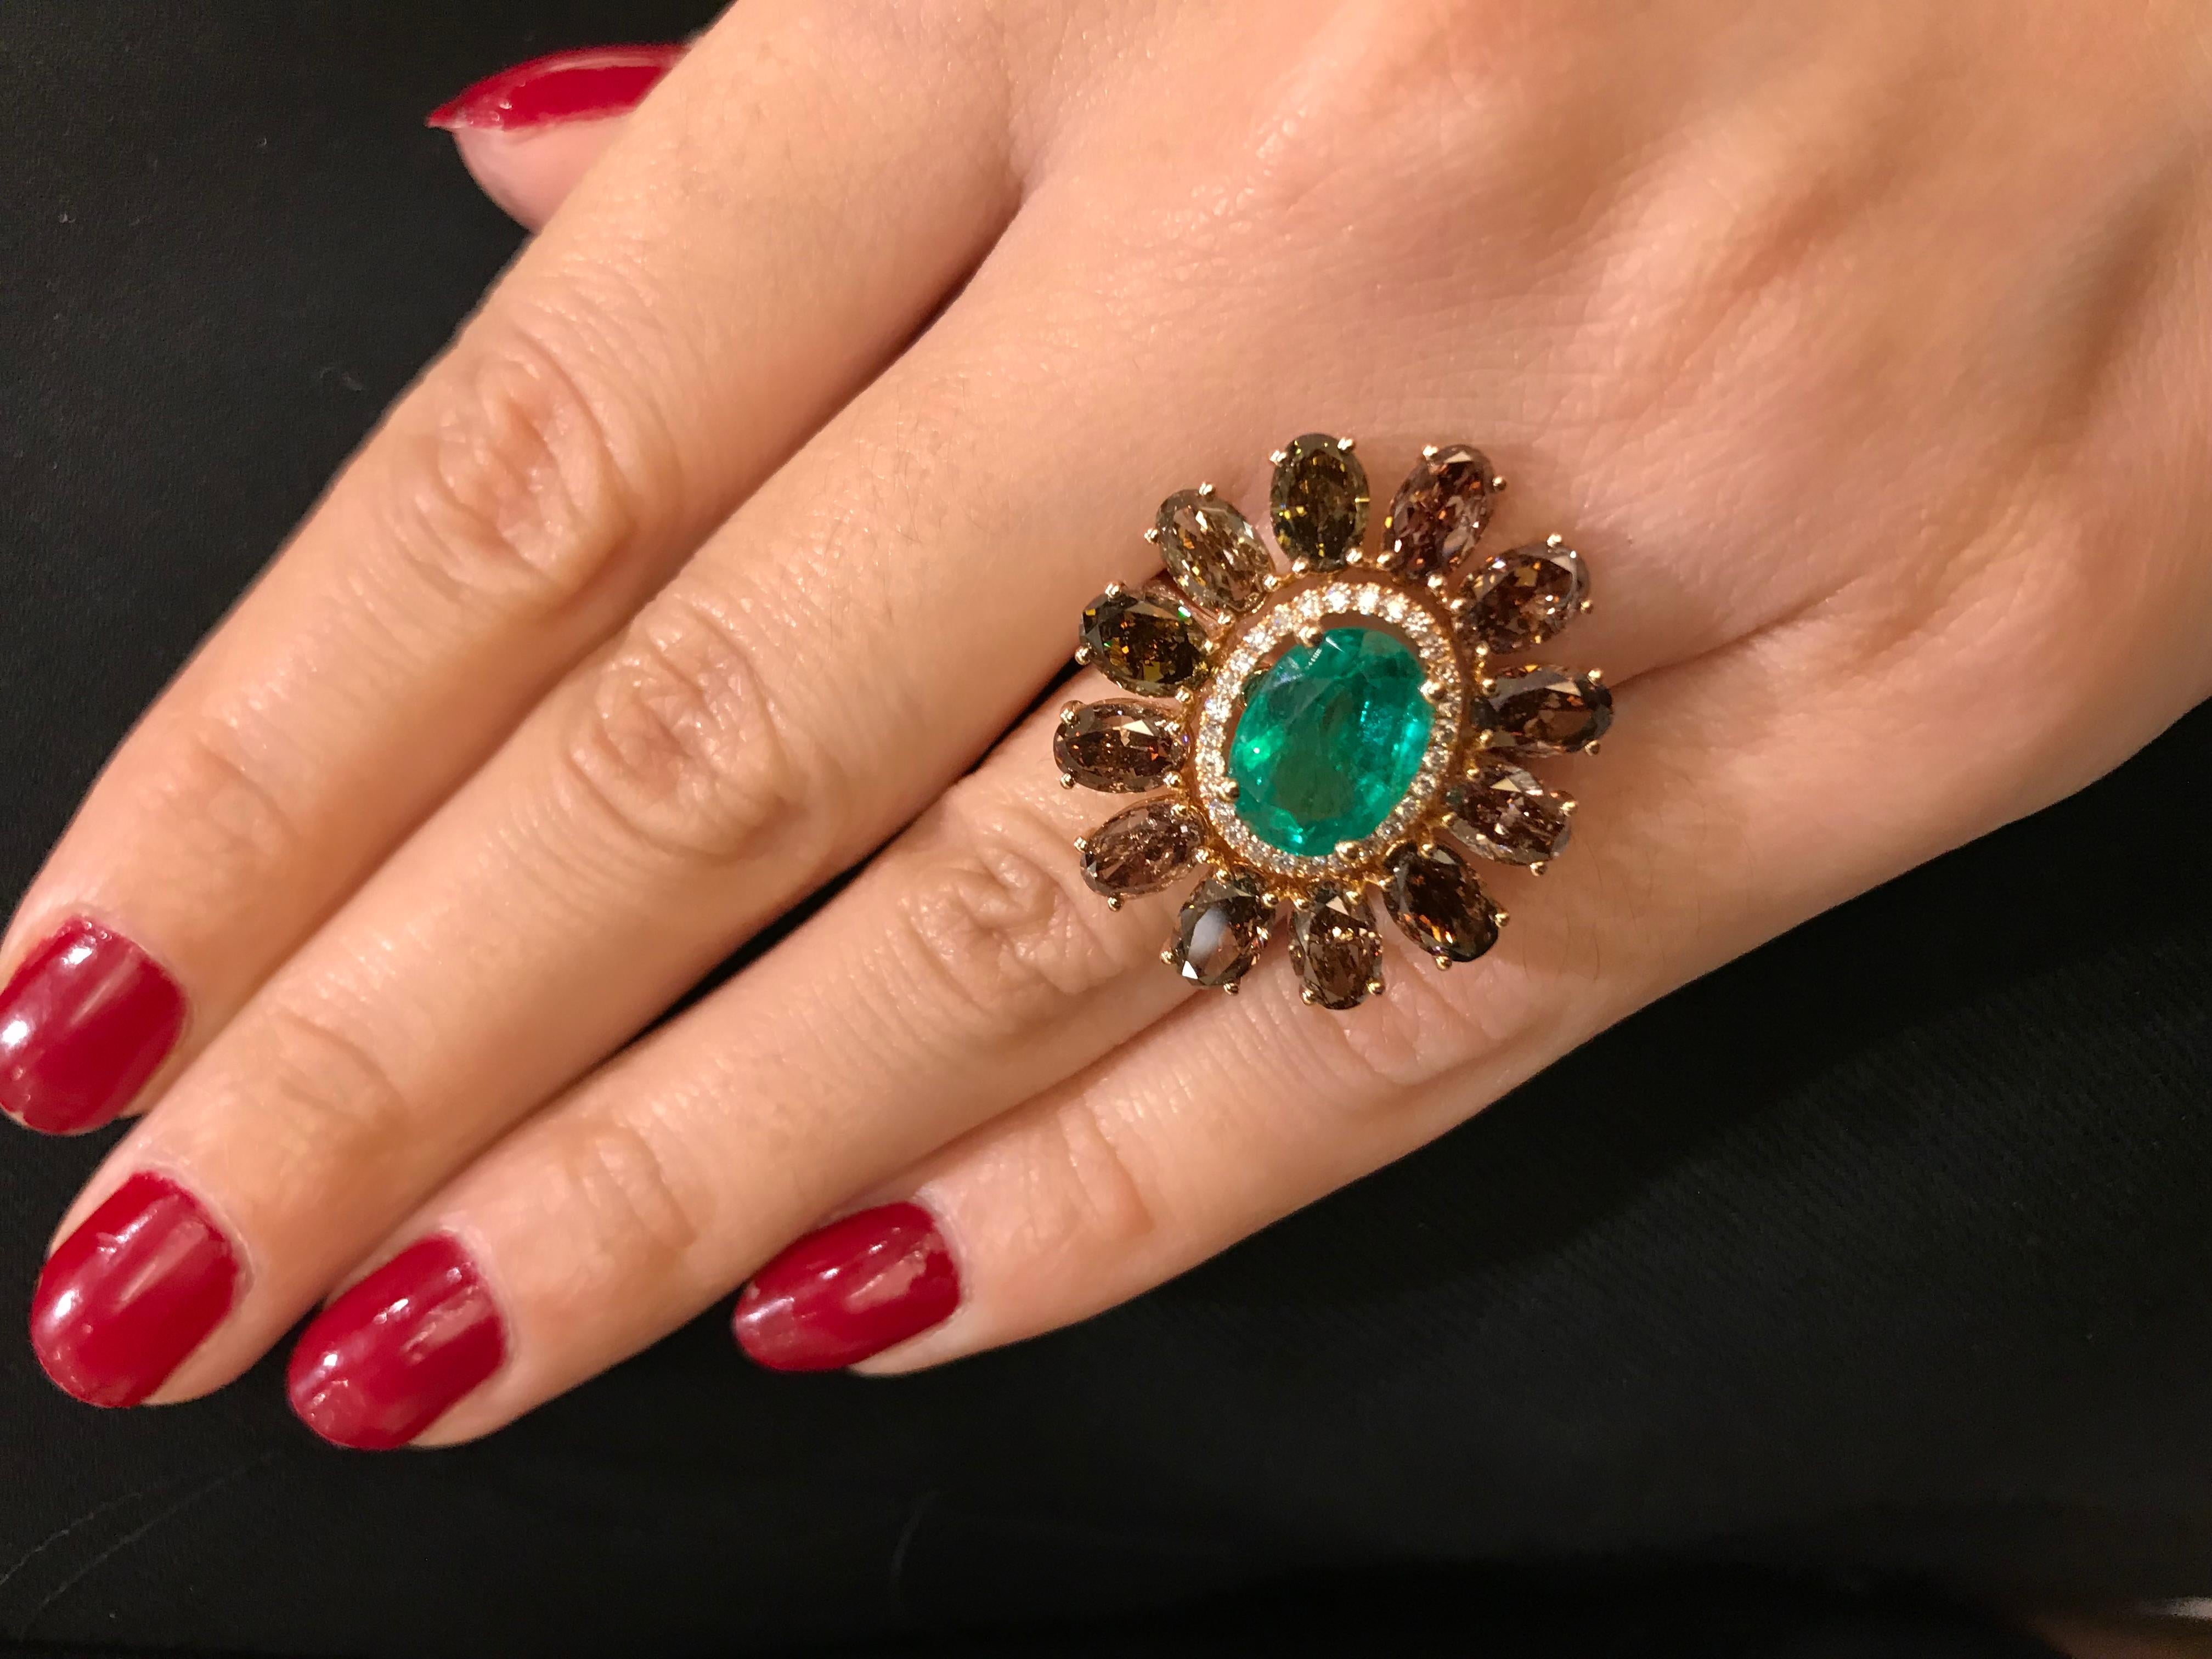 Inspired by the evening sun in the fall season this handcrafted 18K rose gold cocktail ring features an oval emerald accented by round brilliant diamonds in the center and is surrounded by 12 oval brown diamonds weighing approximately 0.60 carats